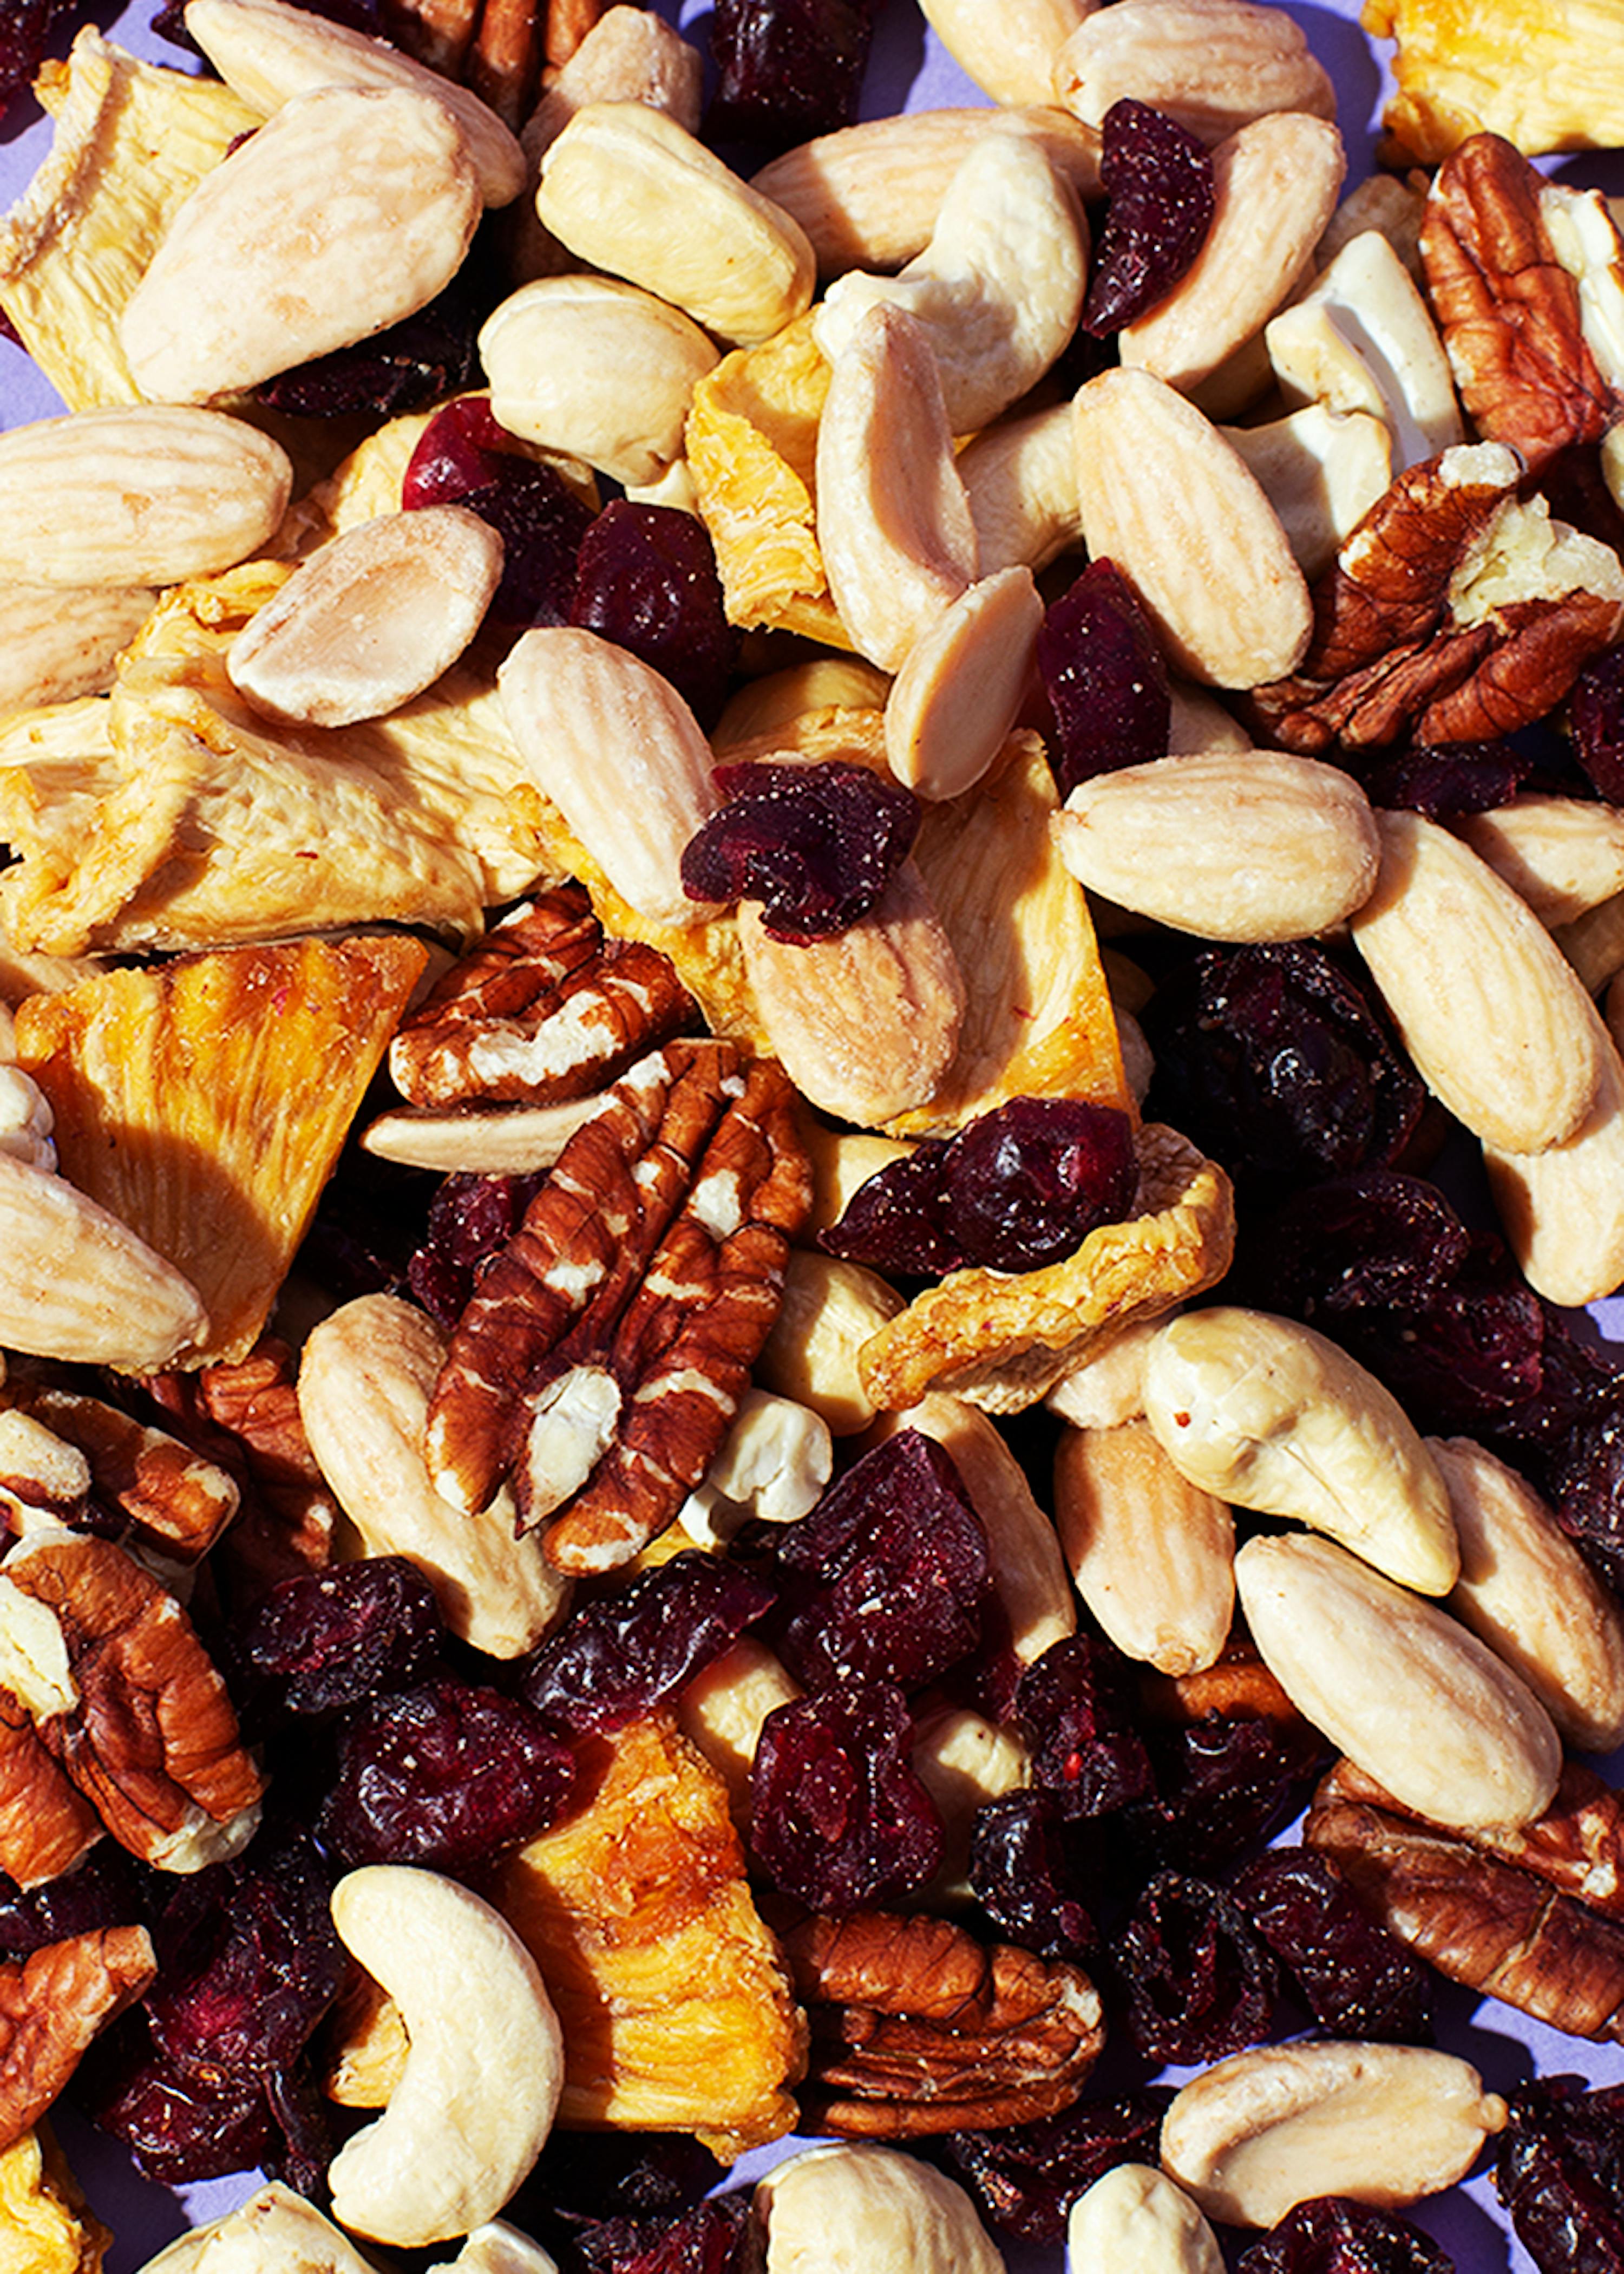 Mix it up: Buy Sweet and Salty Fruit and Nut Mix